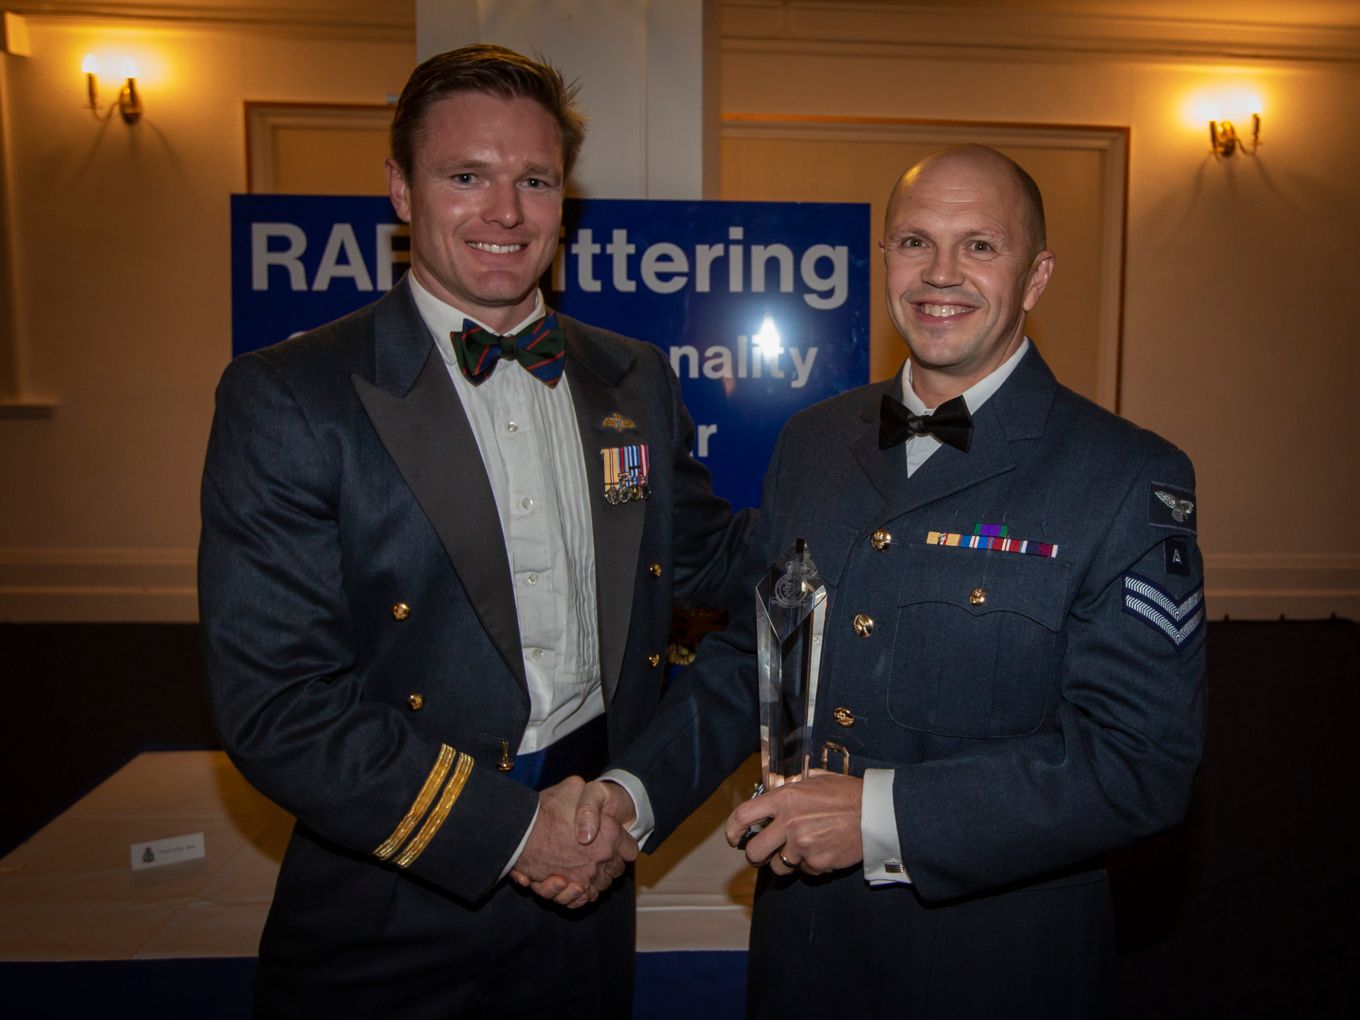 Flt Lt Nathan Jones presents the Coach of the Year award to Cpl Carl Hickman